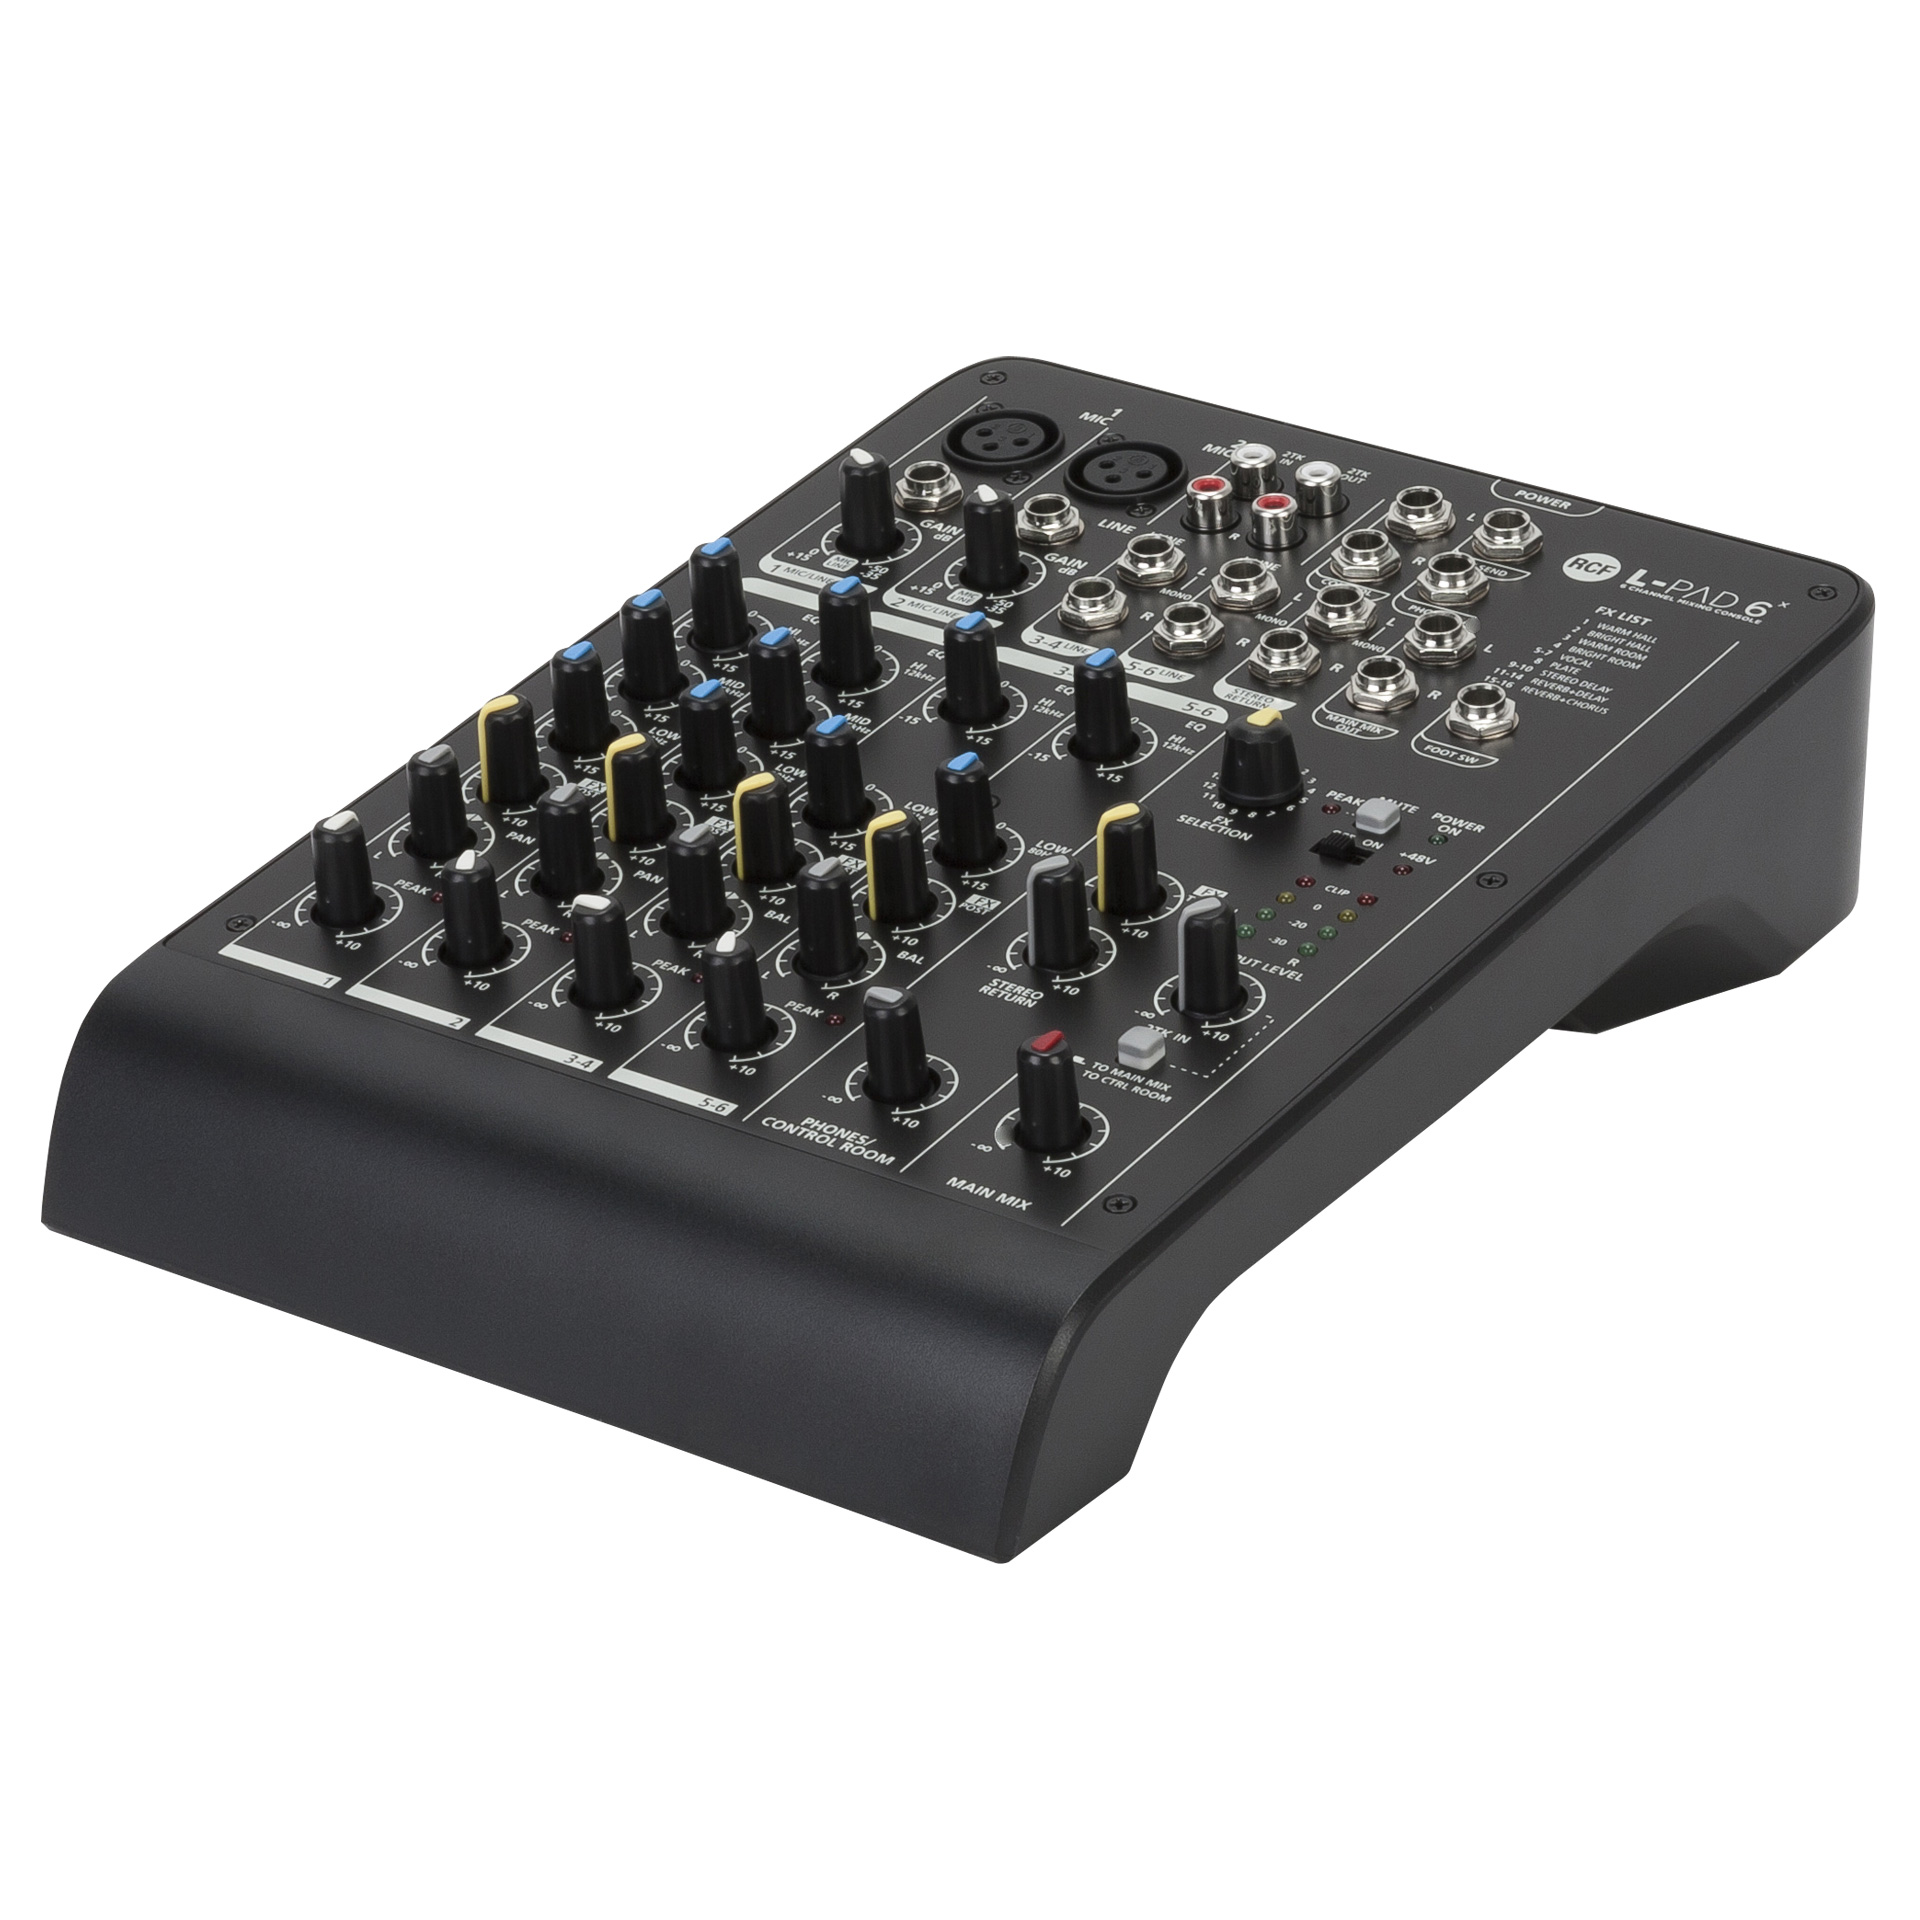 L-PAD 6X 6 CHANNEL MIXING CONSOLE WITH EFFECTS